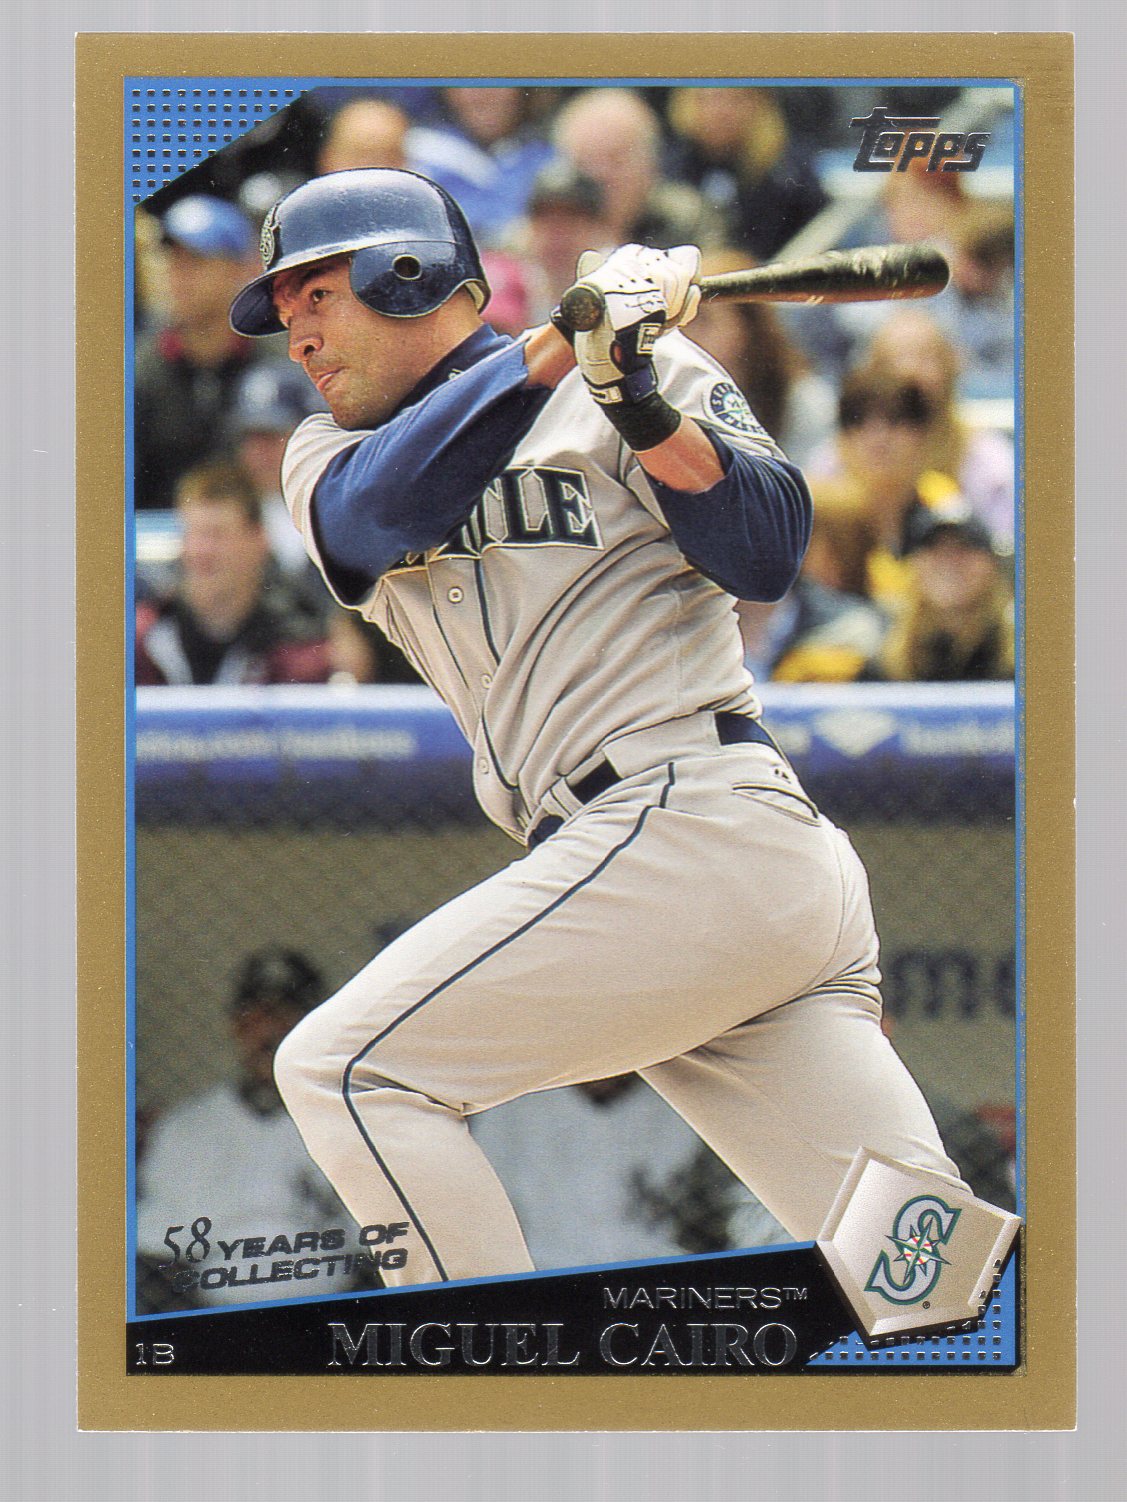 2009 Topps Gold Border #82 Miguel Cairo